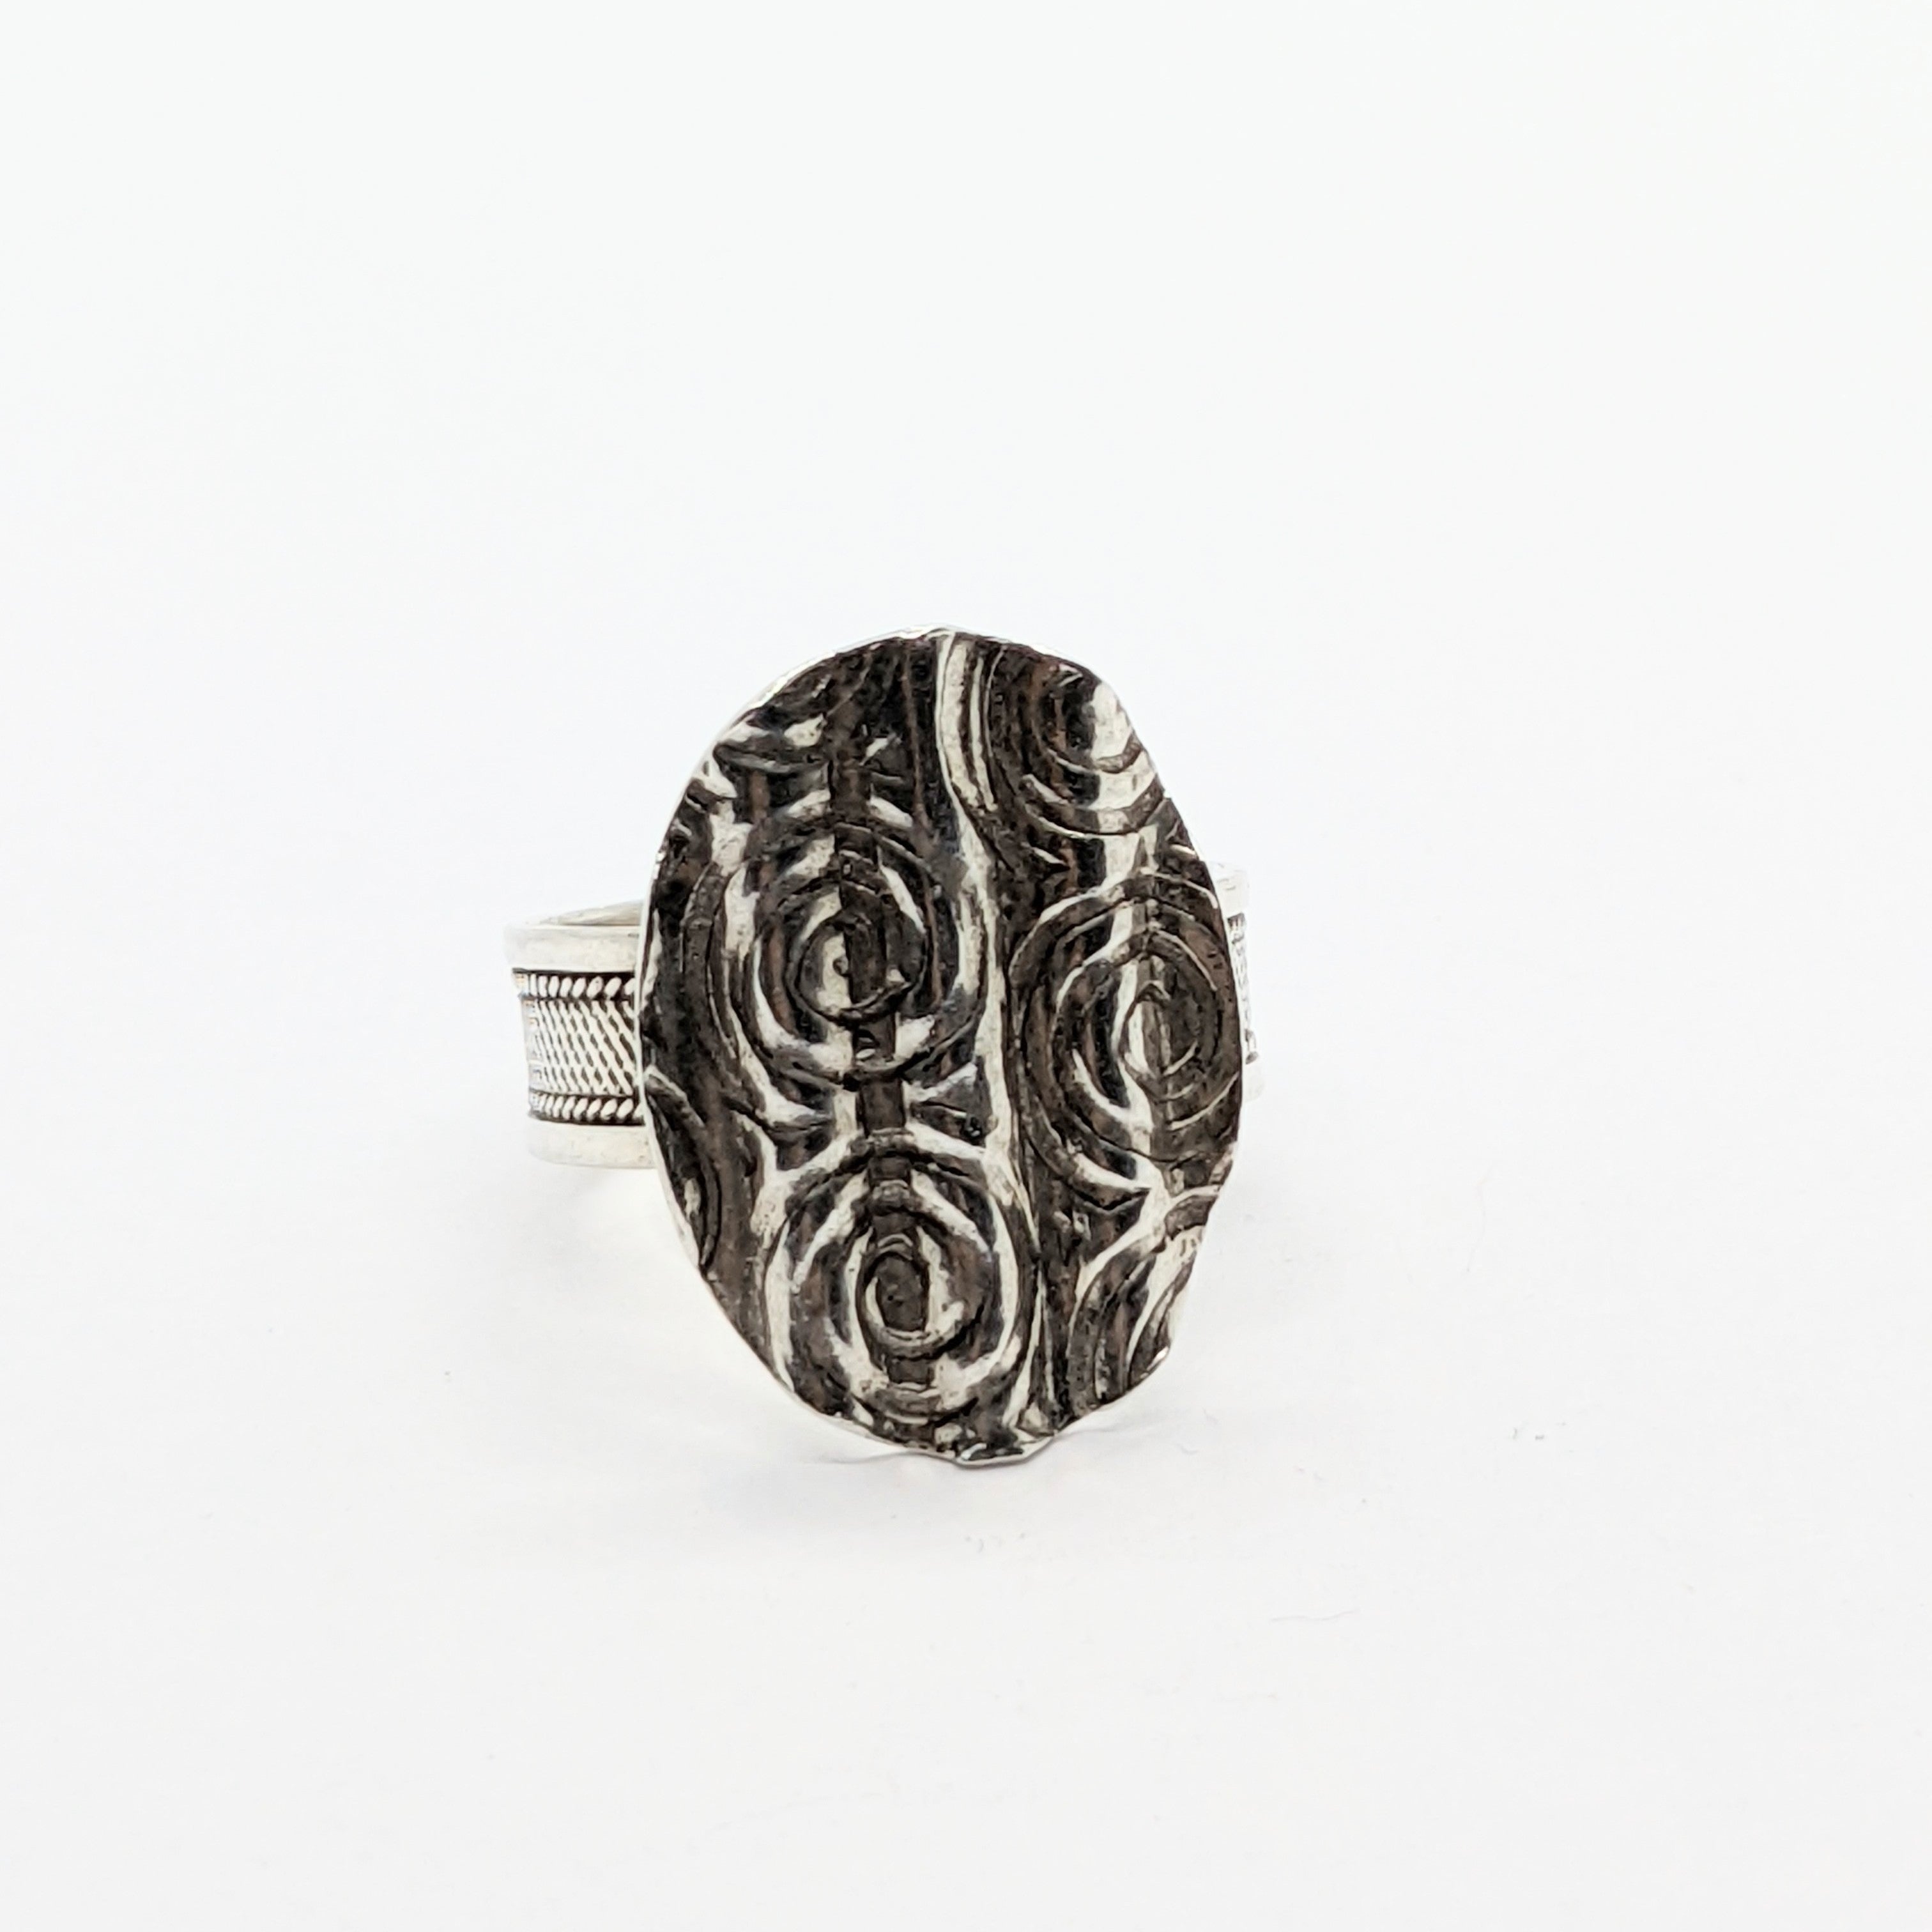 Lined Swirl Armor Ring Size 8